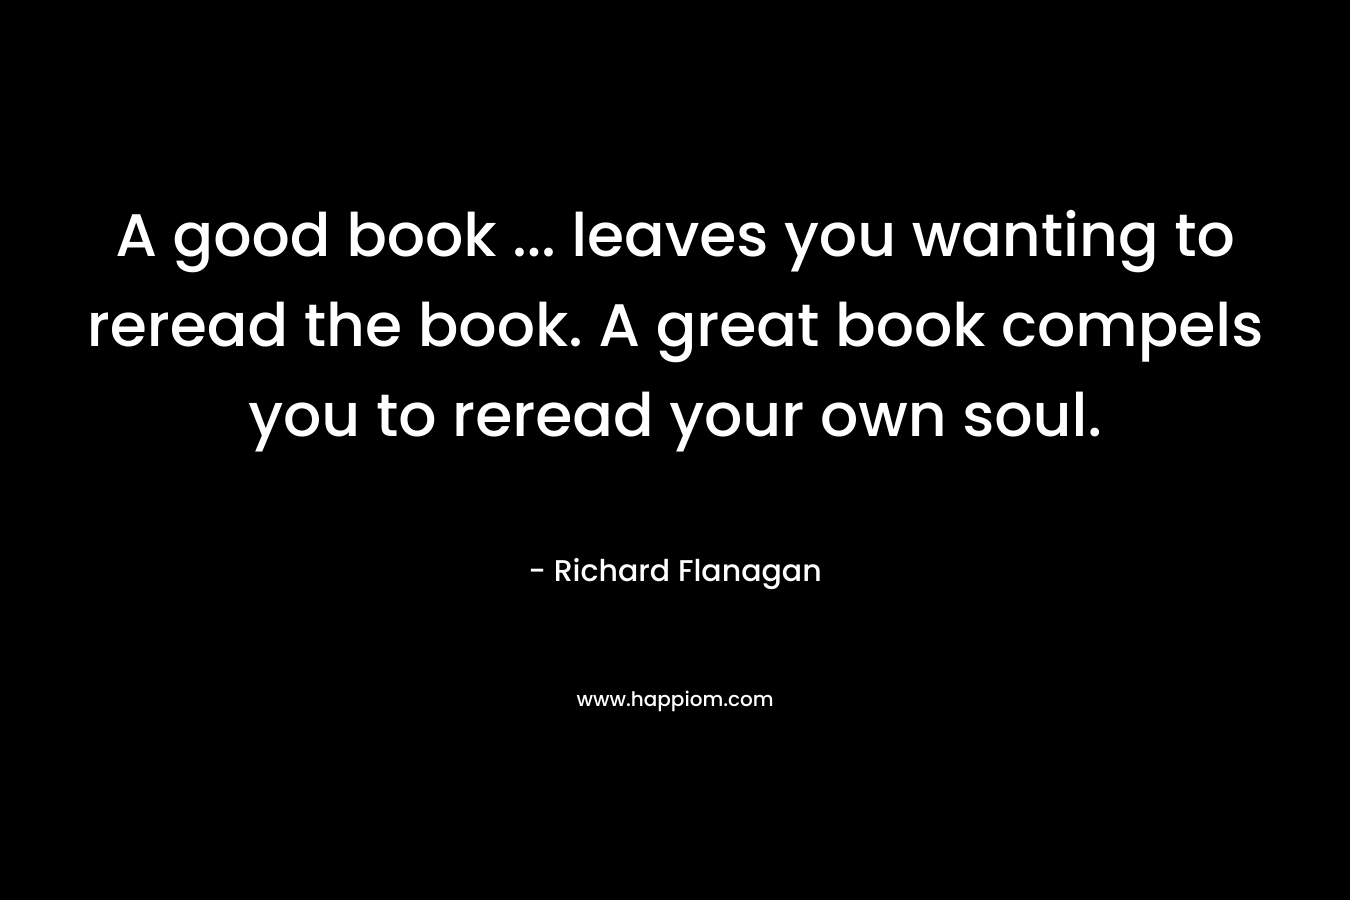 A good book ... leaves you wanting to reread the book. A great book compels you to reread your own soul.